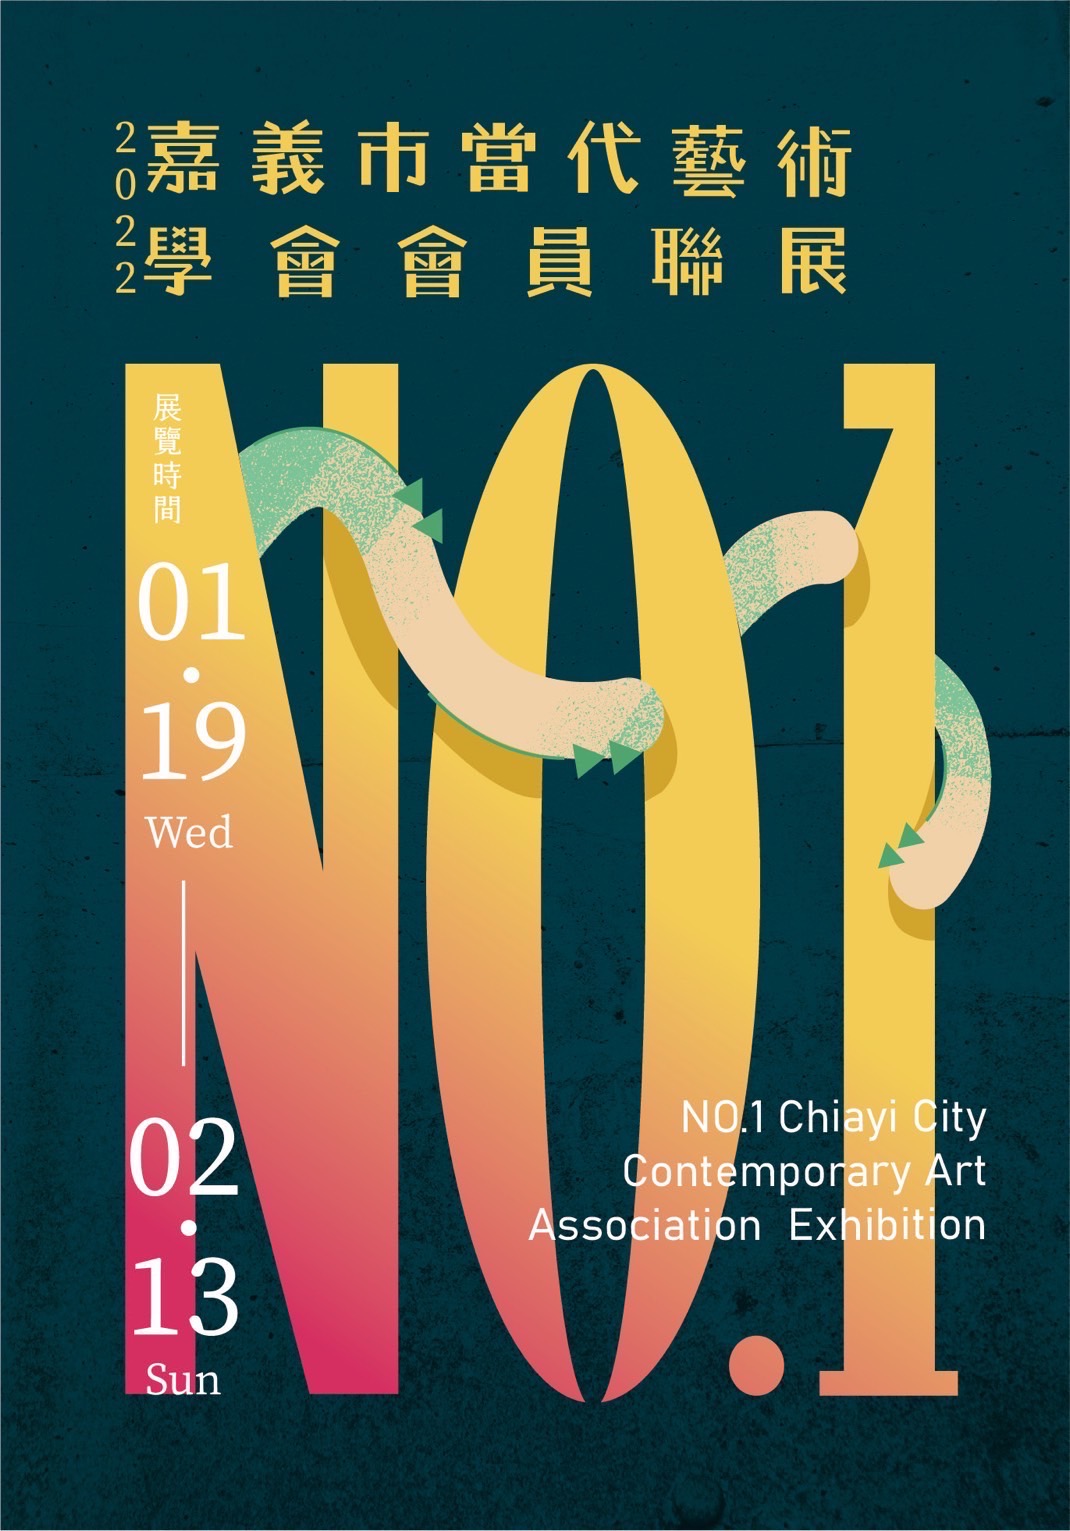 Poster of “No.1 Chiayi City Contemporary Art Association Exhibition”. (Photo / Provided by Chiayi City Contemporary Art Association)